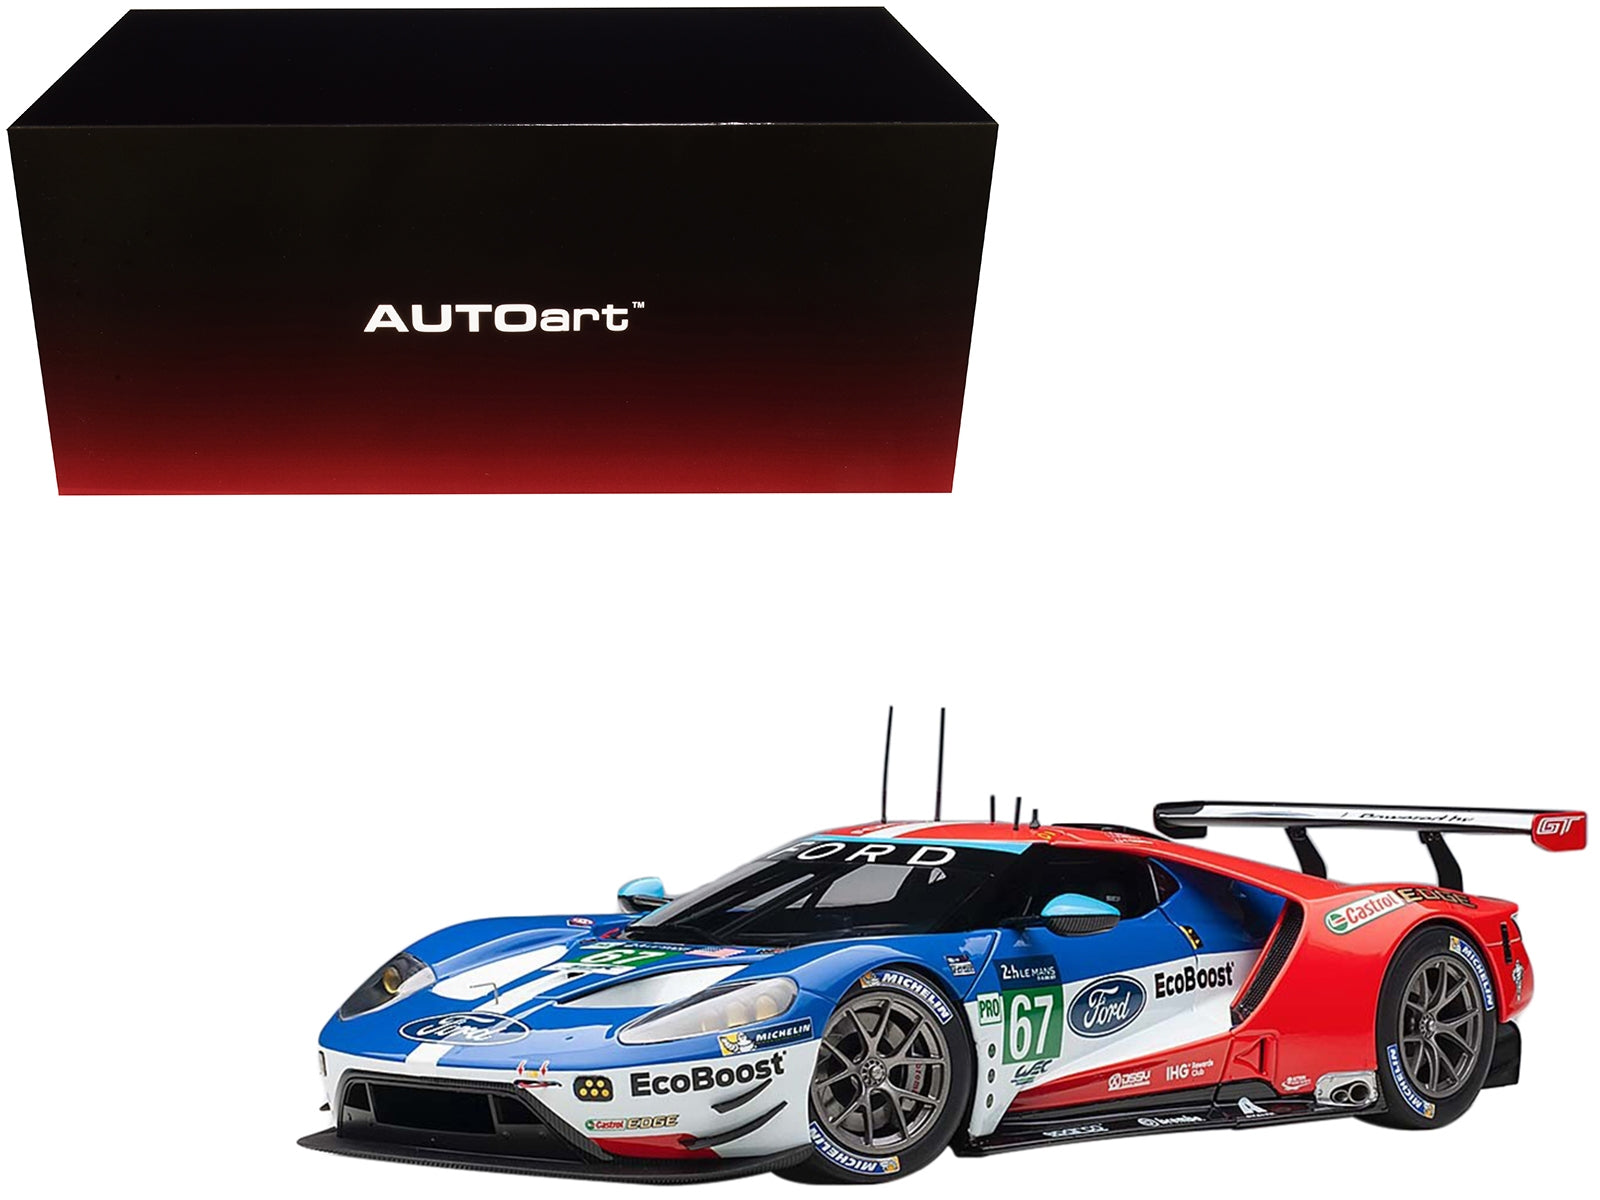 Ford GT #67 Harry Tincknell - Andy Priaulx - Pipo Derani "Ford Chip Ganassi Team UK" 24H Le Mans (2017) 1/18 Model Car by Autoart